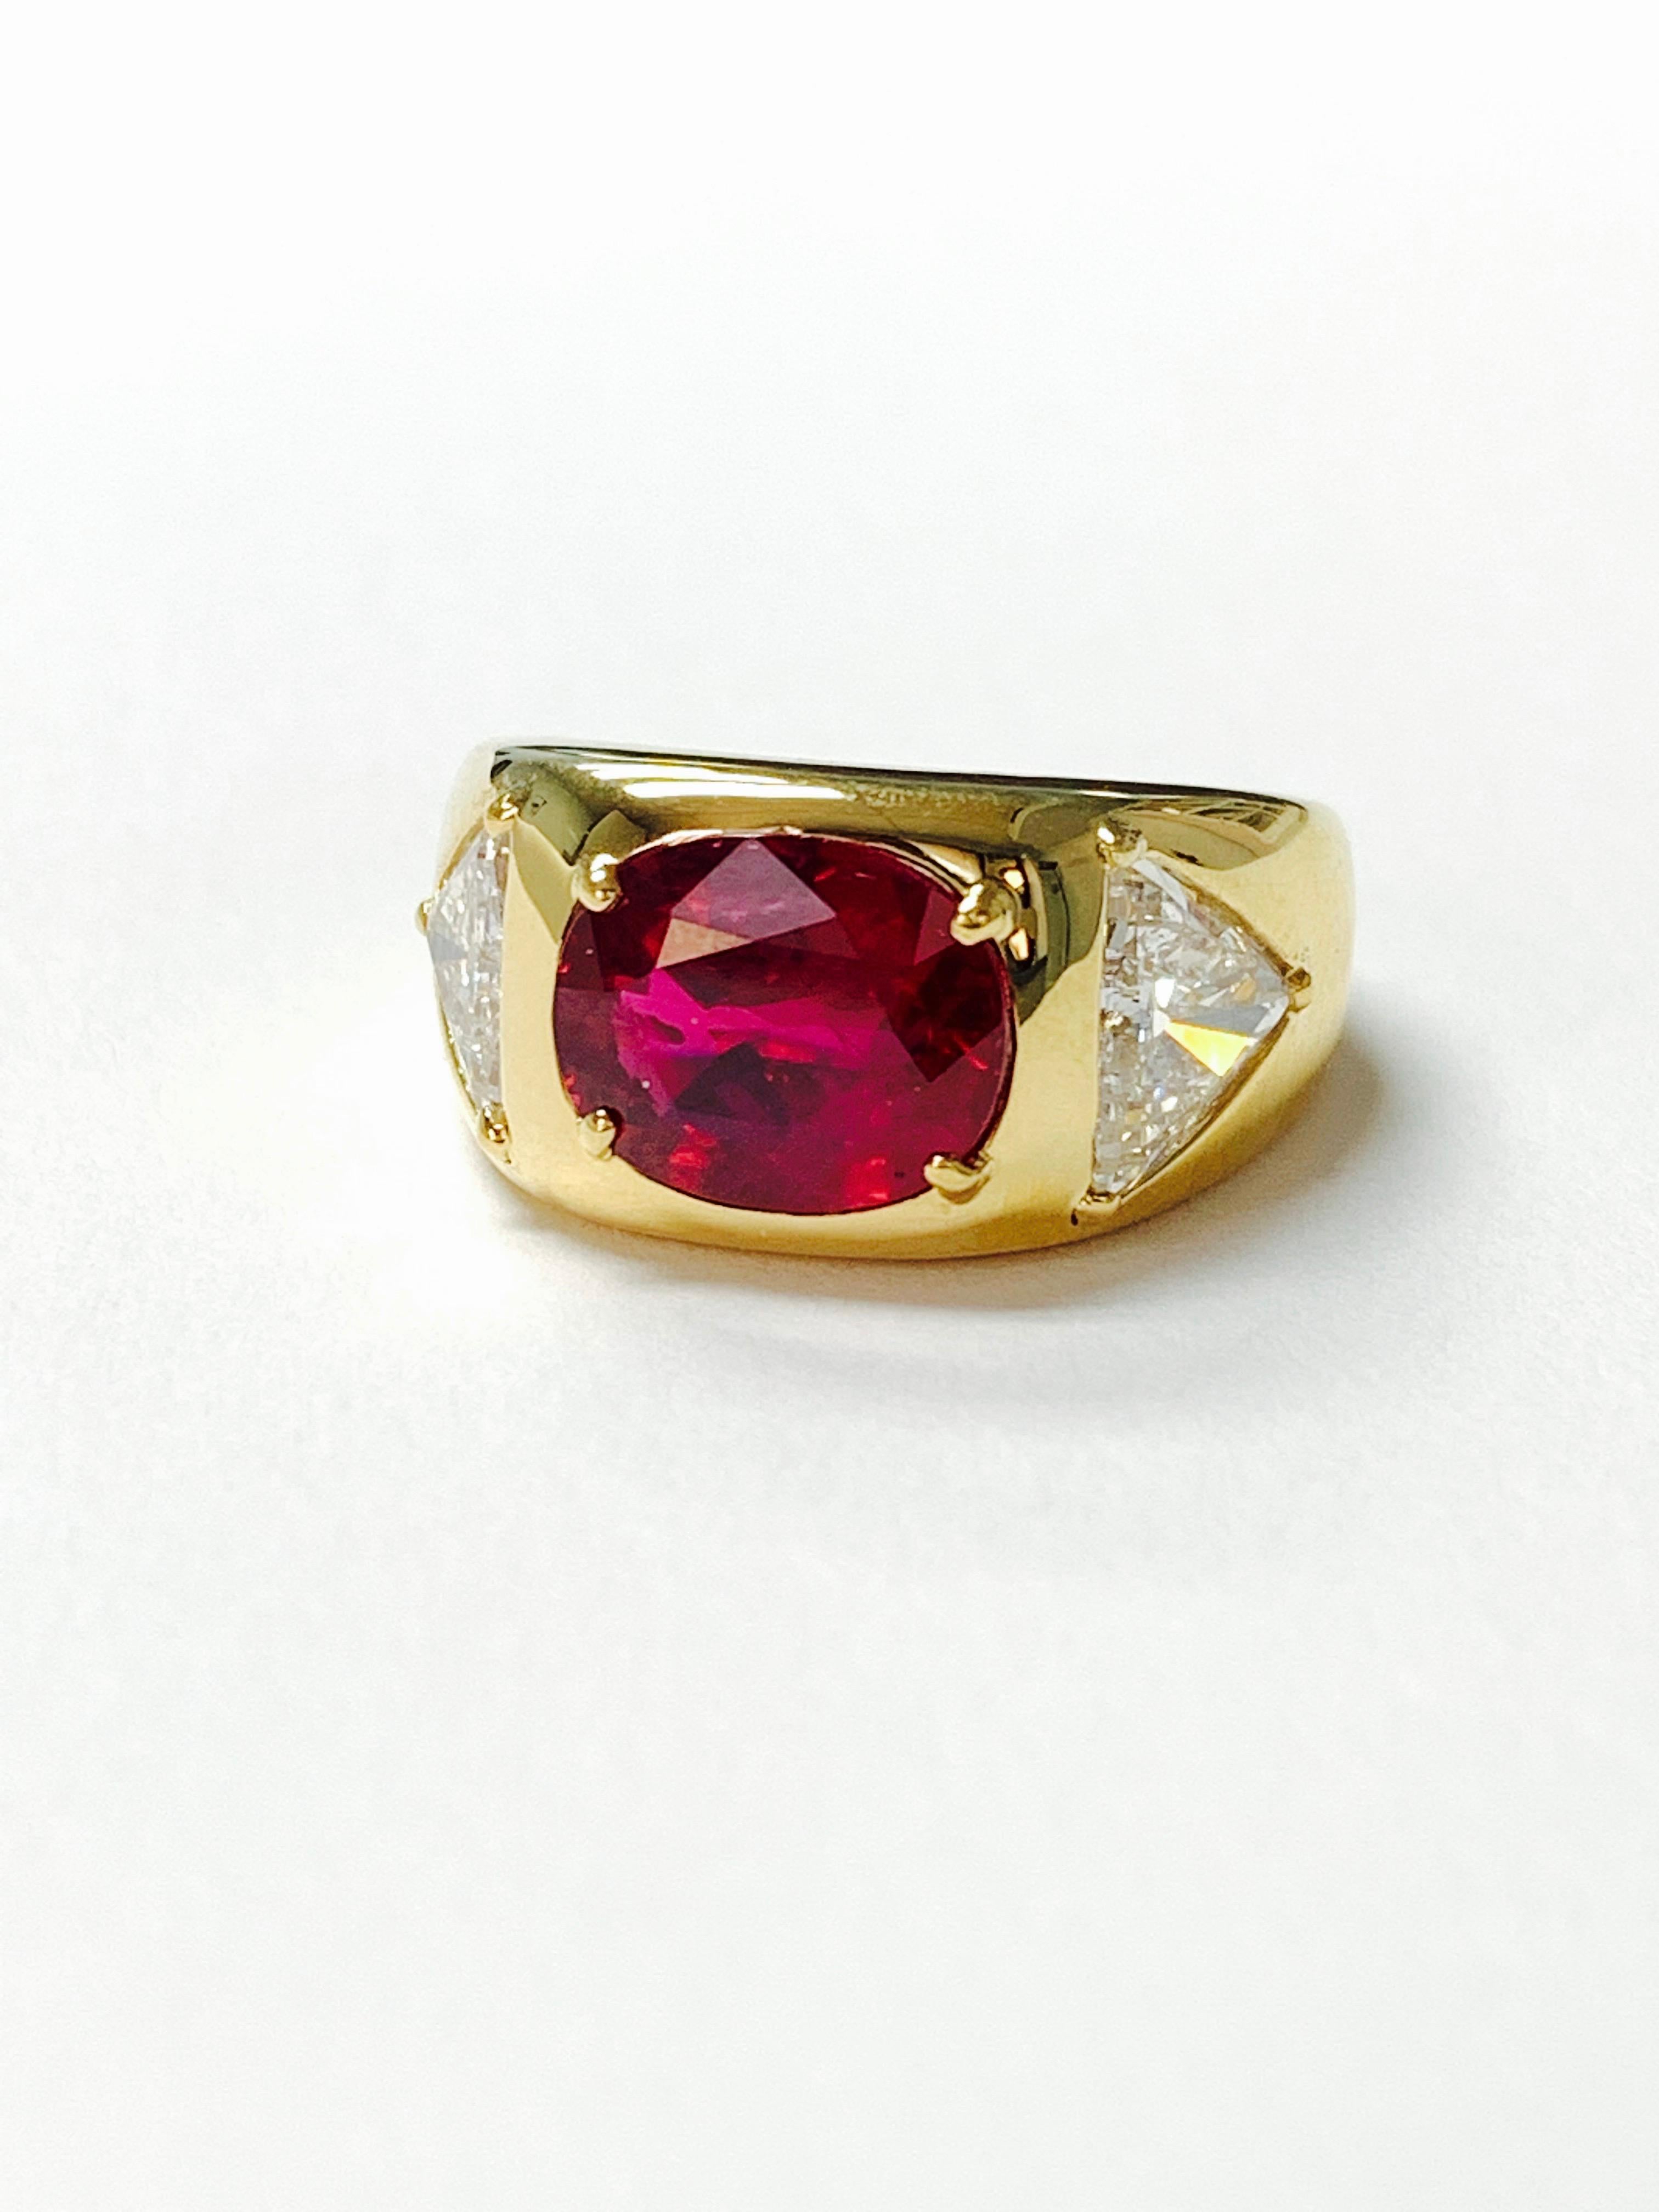 Oval Ruby Ring and trillion diamond engagement ring in 18k gold, AGL certified. 
The details are as follows : 

Oval Ruby weight : 2.78 carat 
Trillion diamond weight : 1.50/2 
Metal : 18k yellow gold 
Ring size : 6 3/4 
Dimensions :